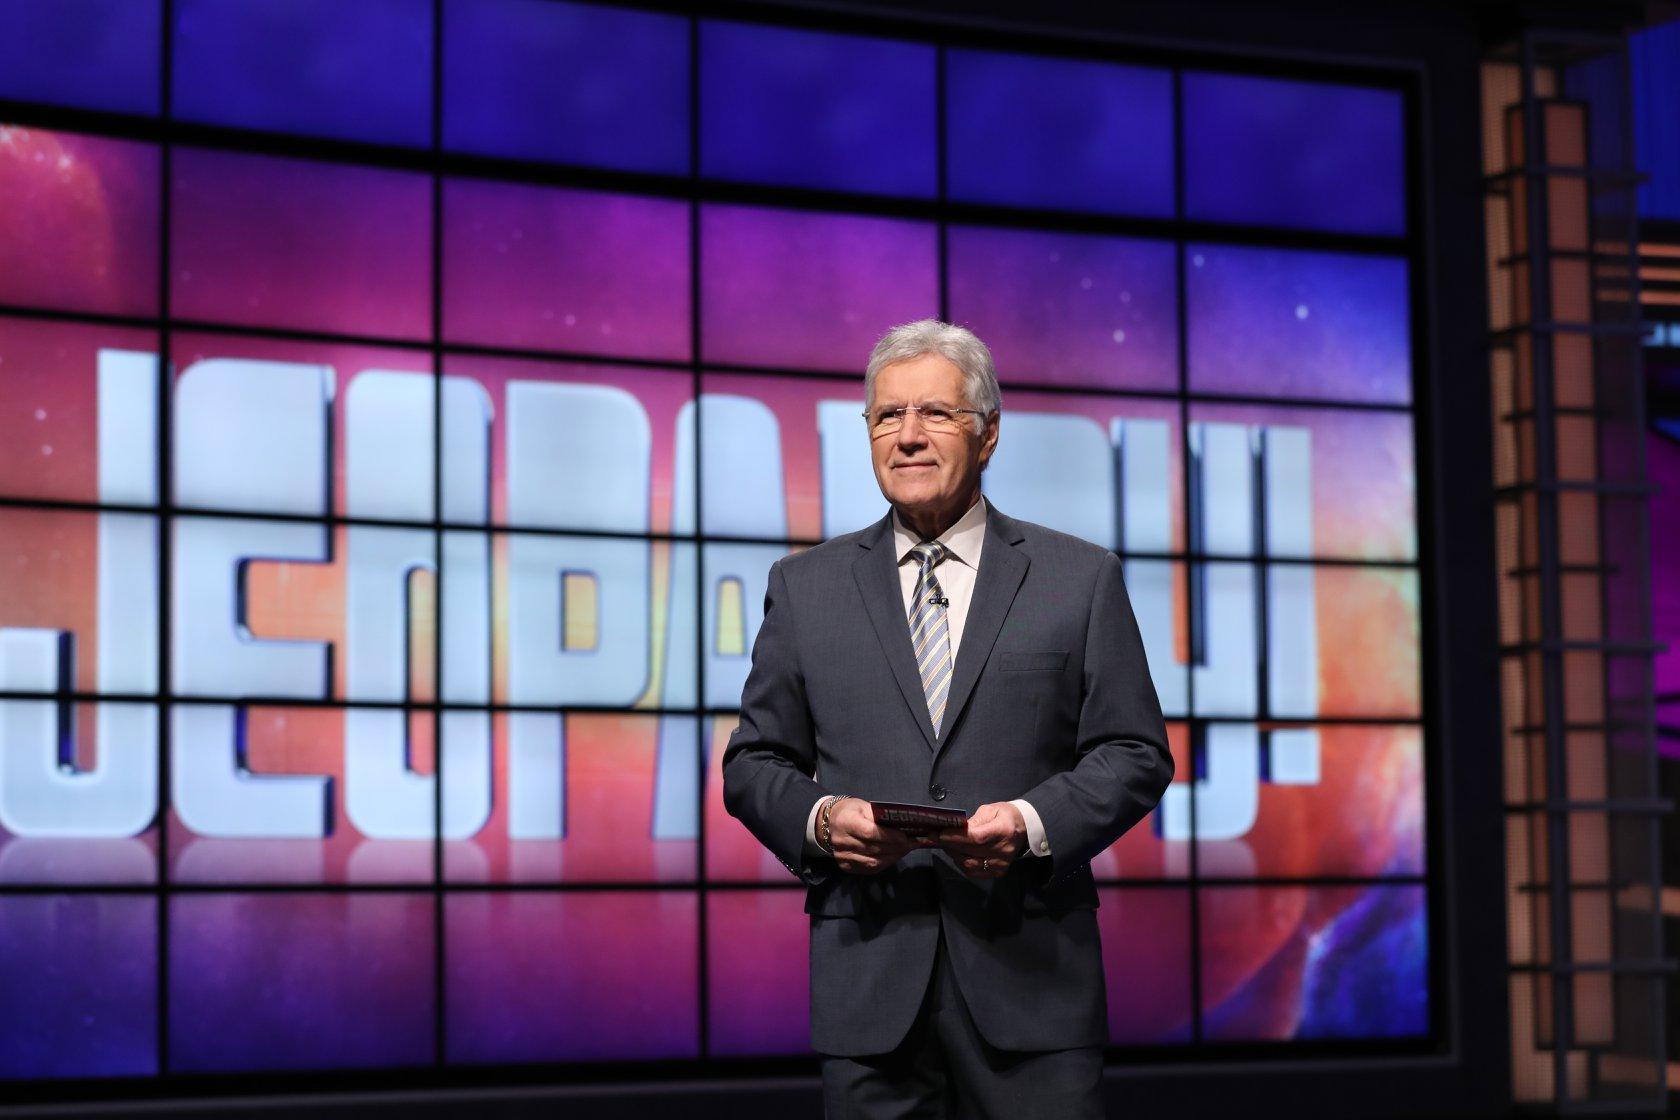 Jeopardy! Producer and Guest Host Mike Richards Pays Tribute to